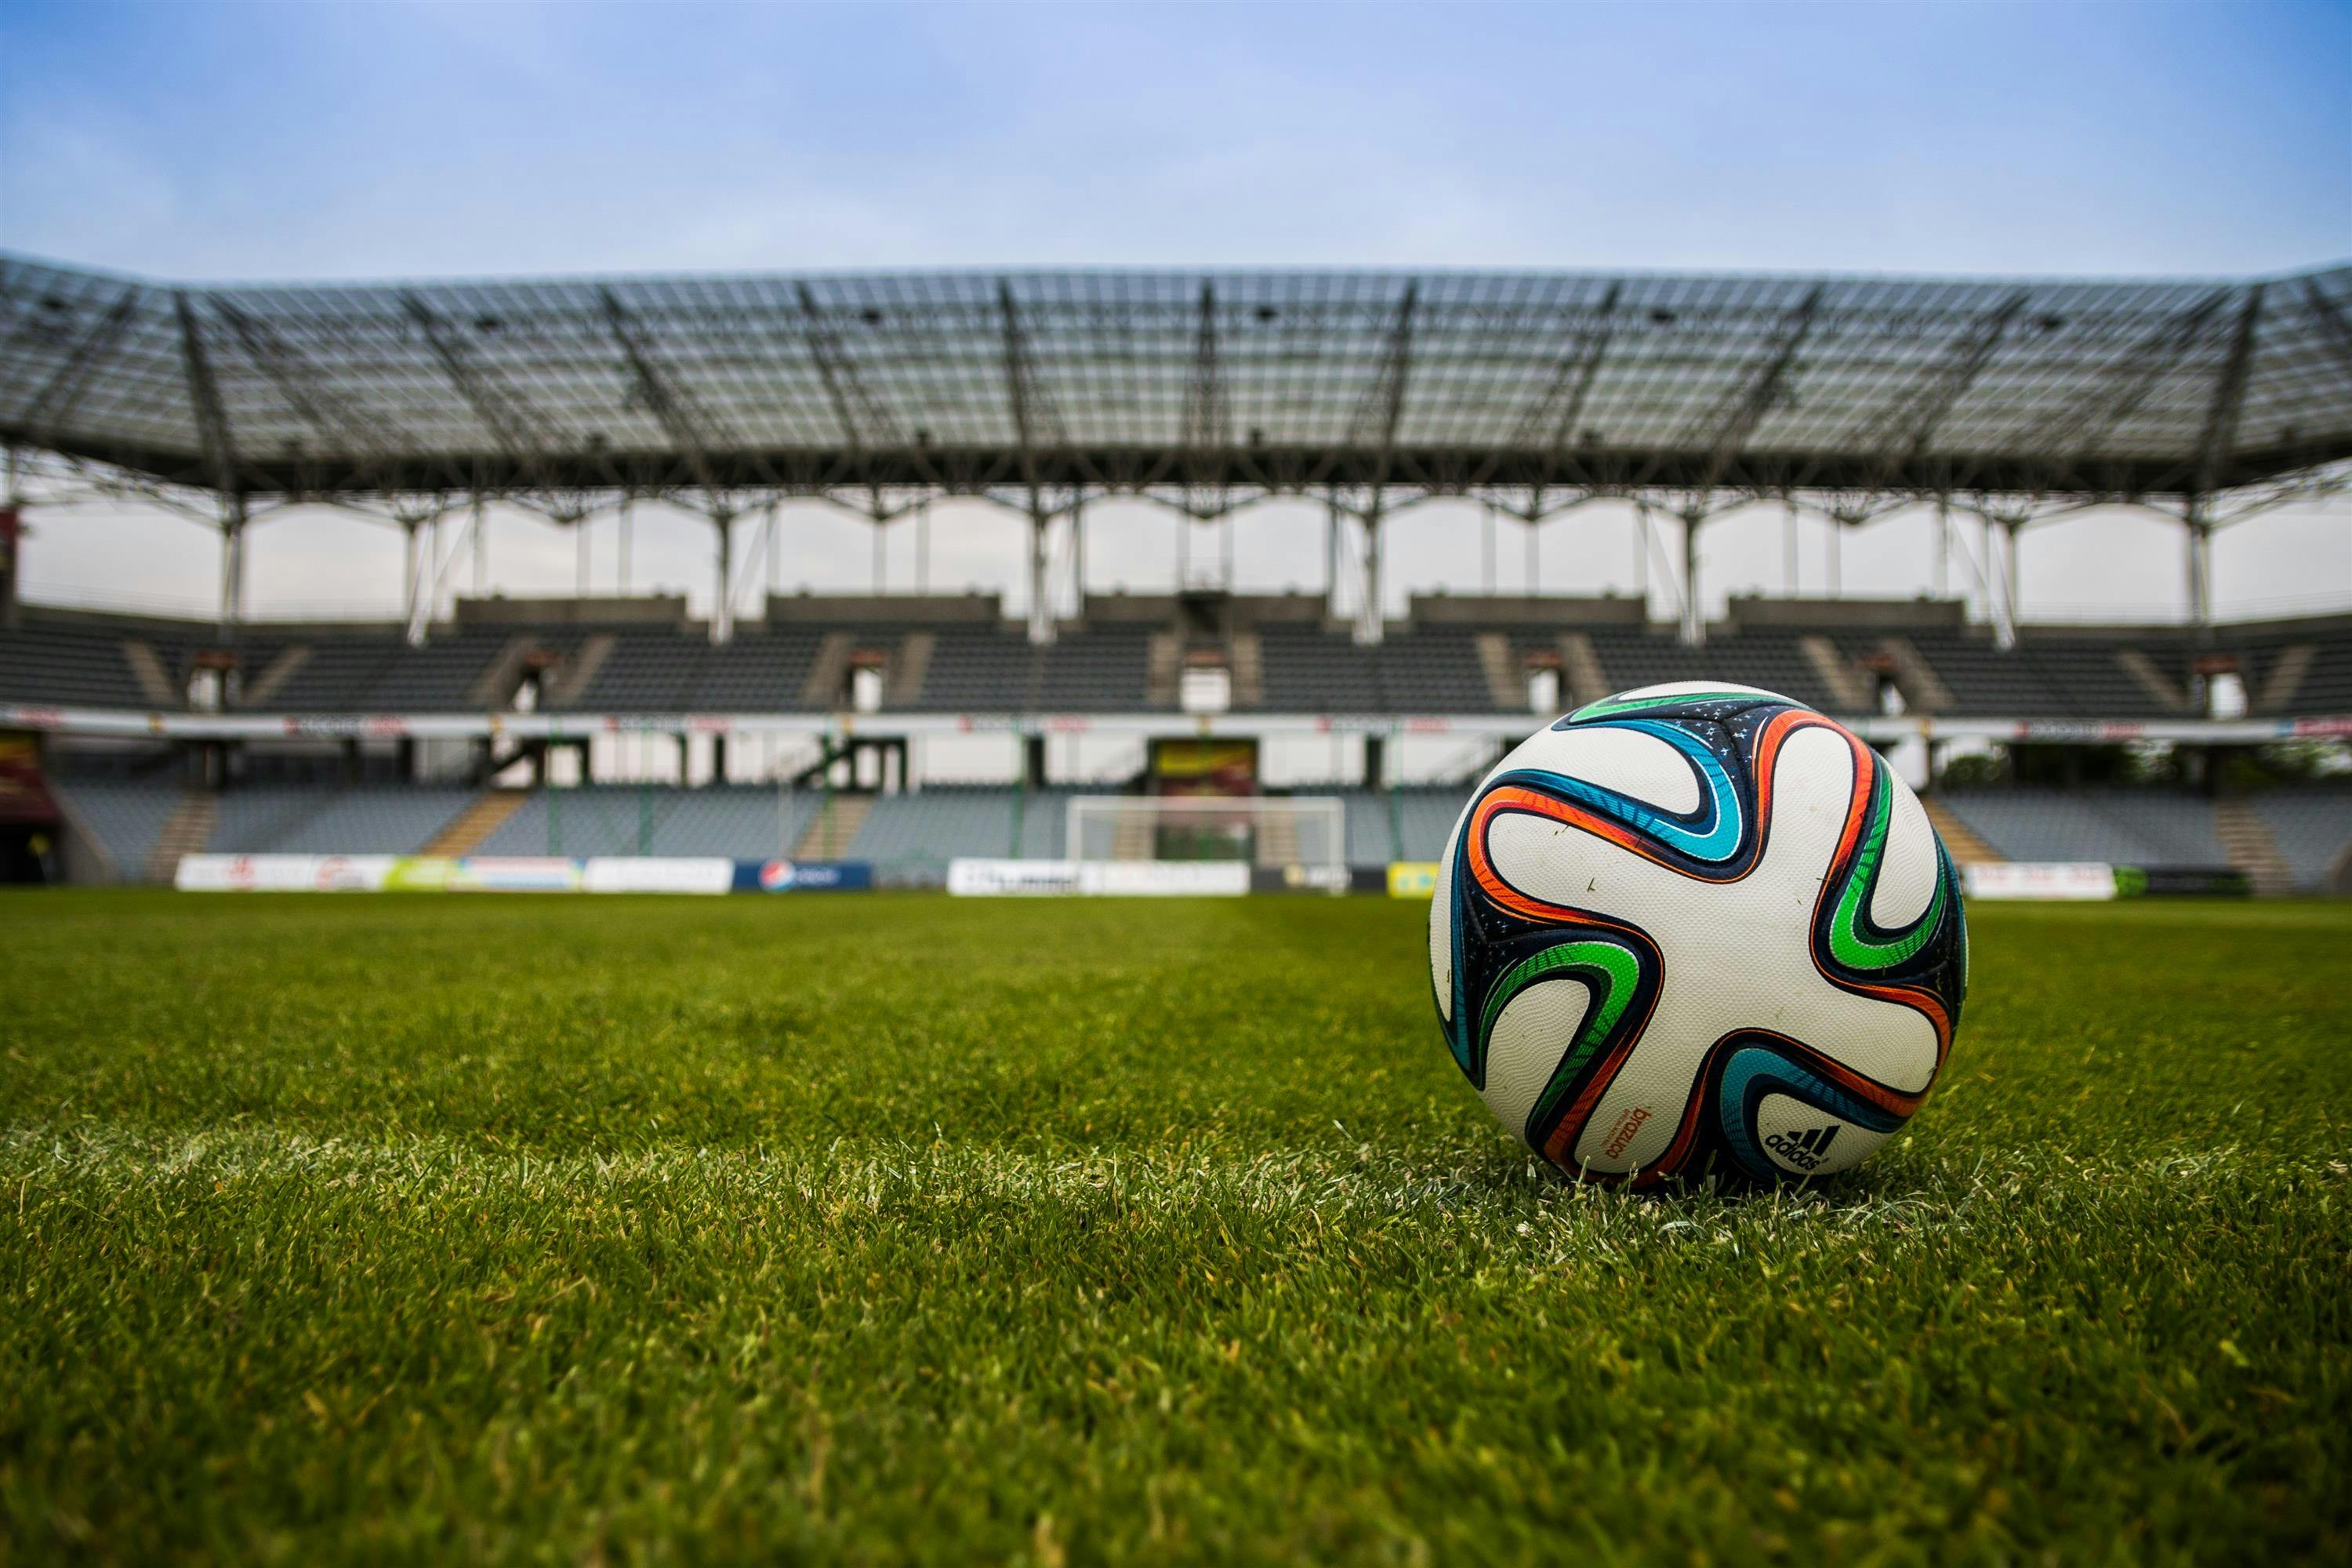 https://images.pexels.com/photos/46798/the-ball-stadion-football-the-pitch-46798.jpeg